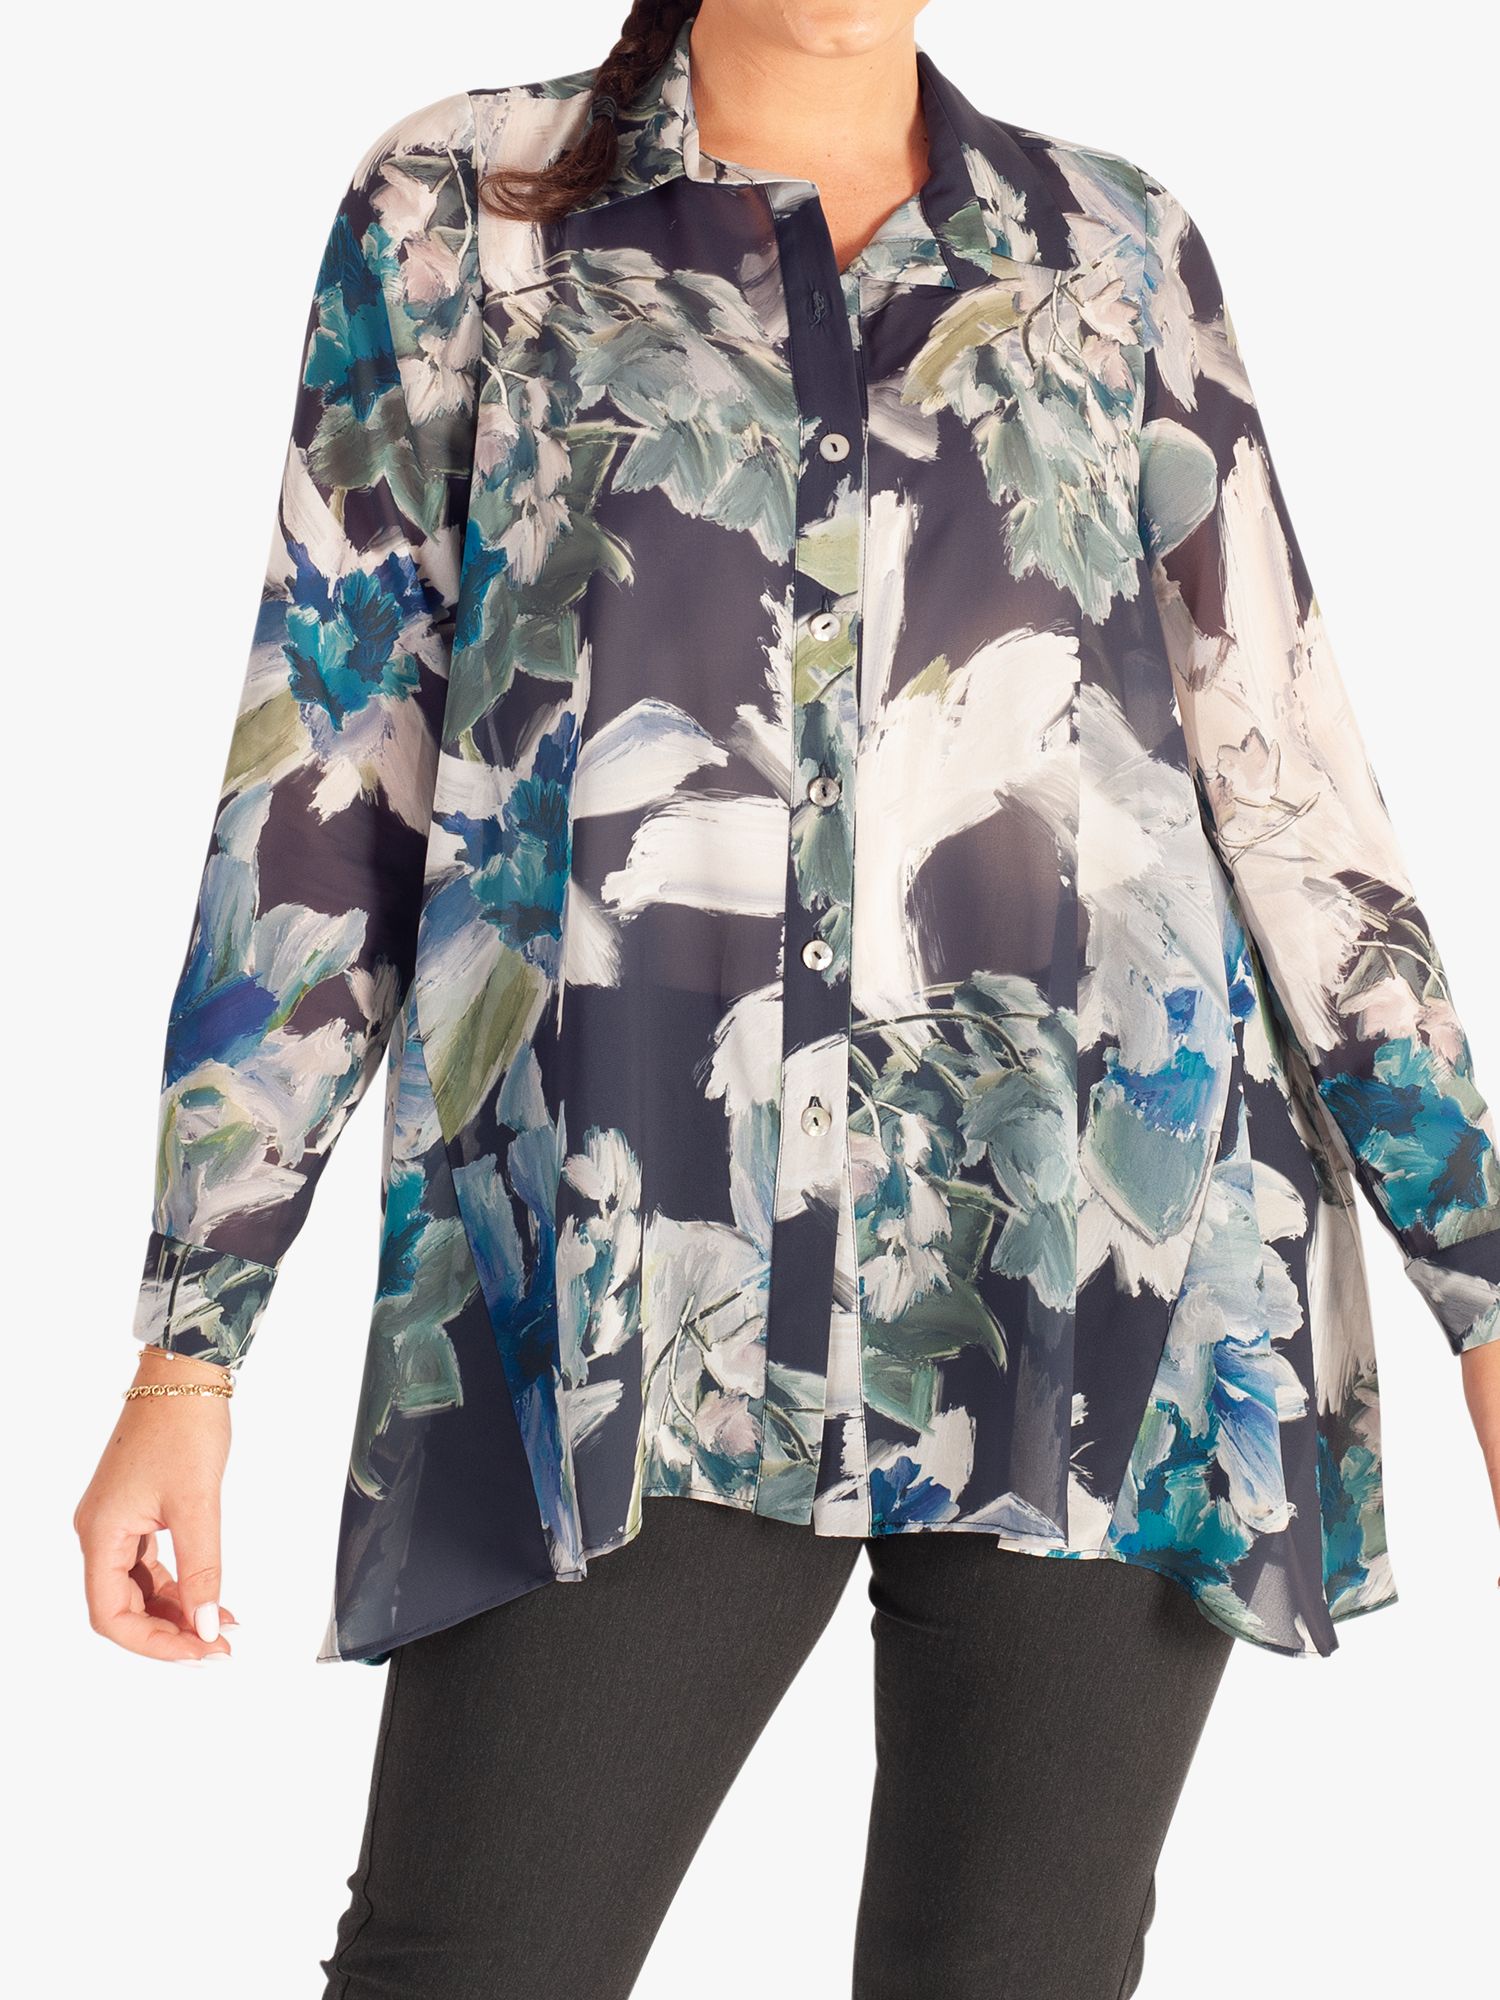 Buy chesca Paris Abstract Floral Print Chiffon Shirt, Navy/Multi Online at johnlewis.com